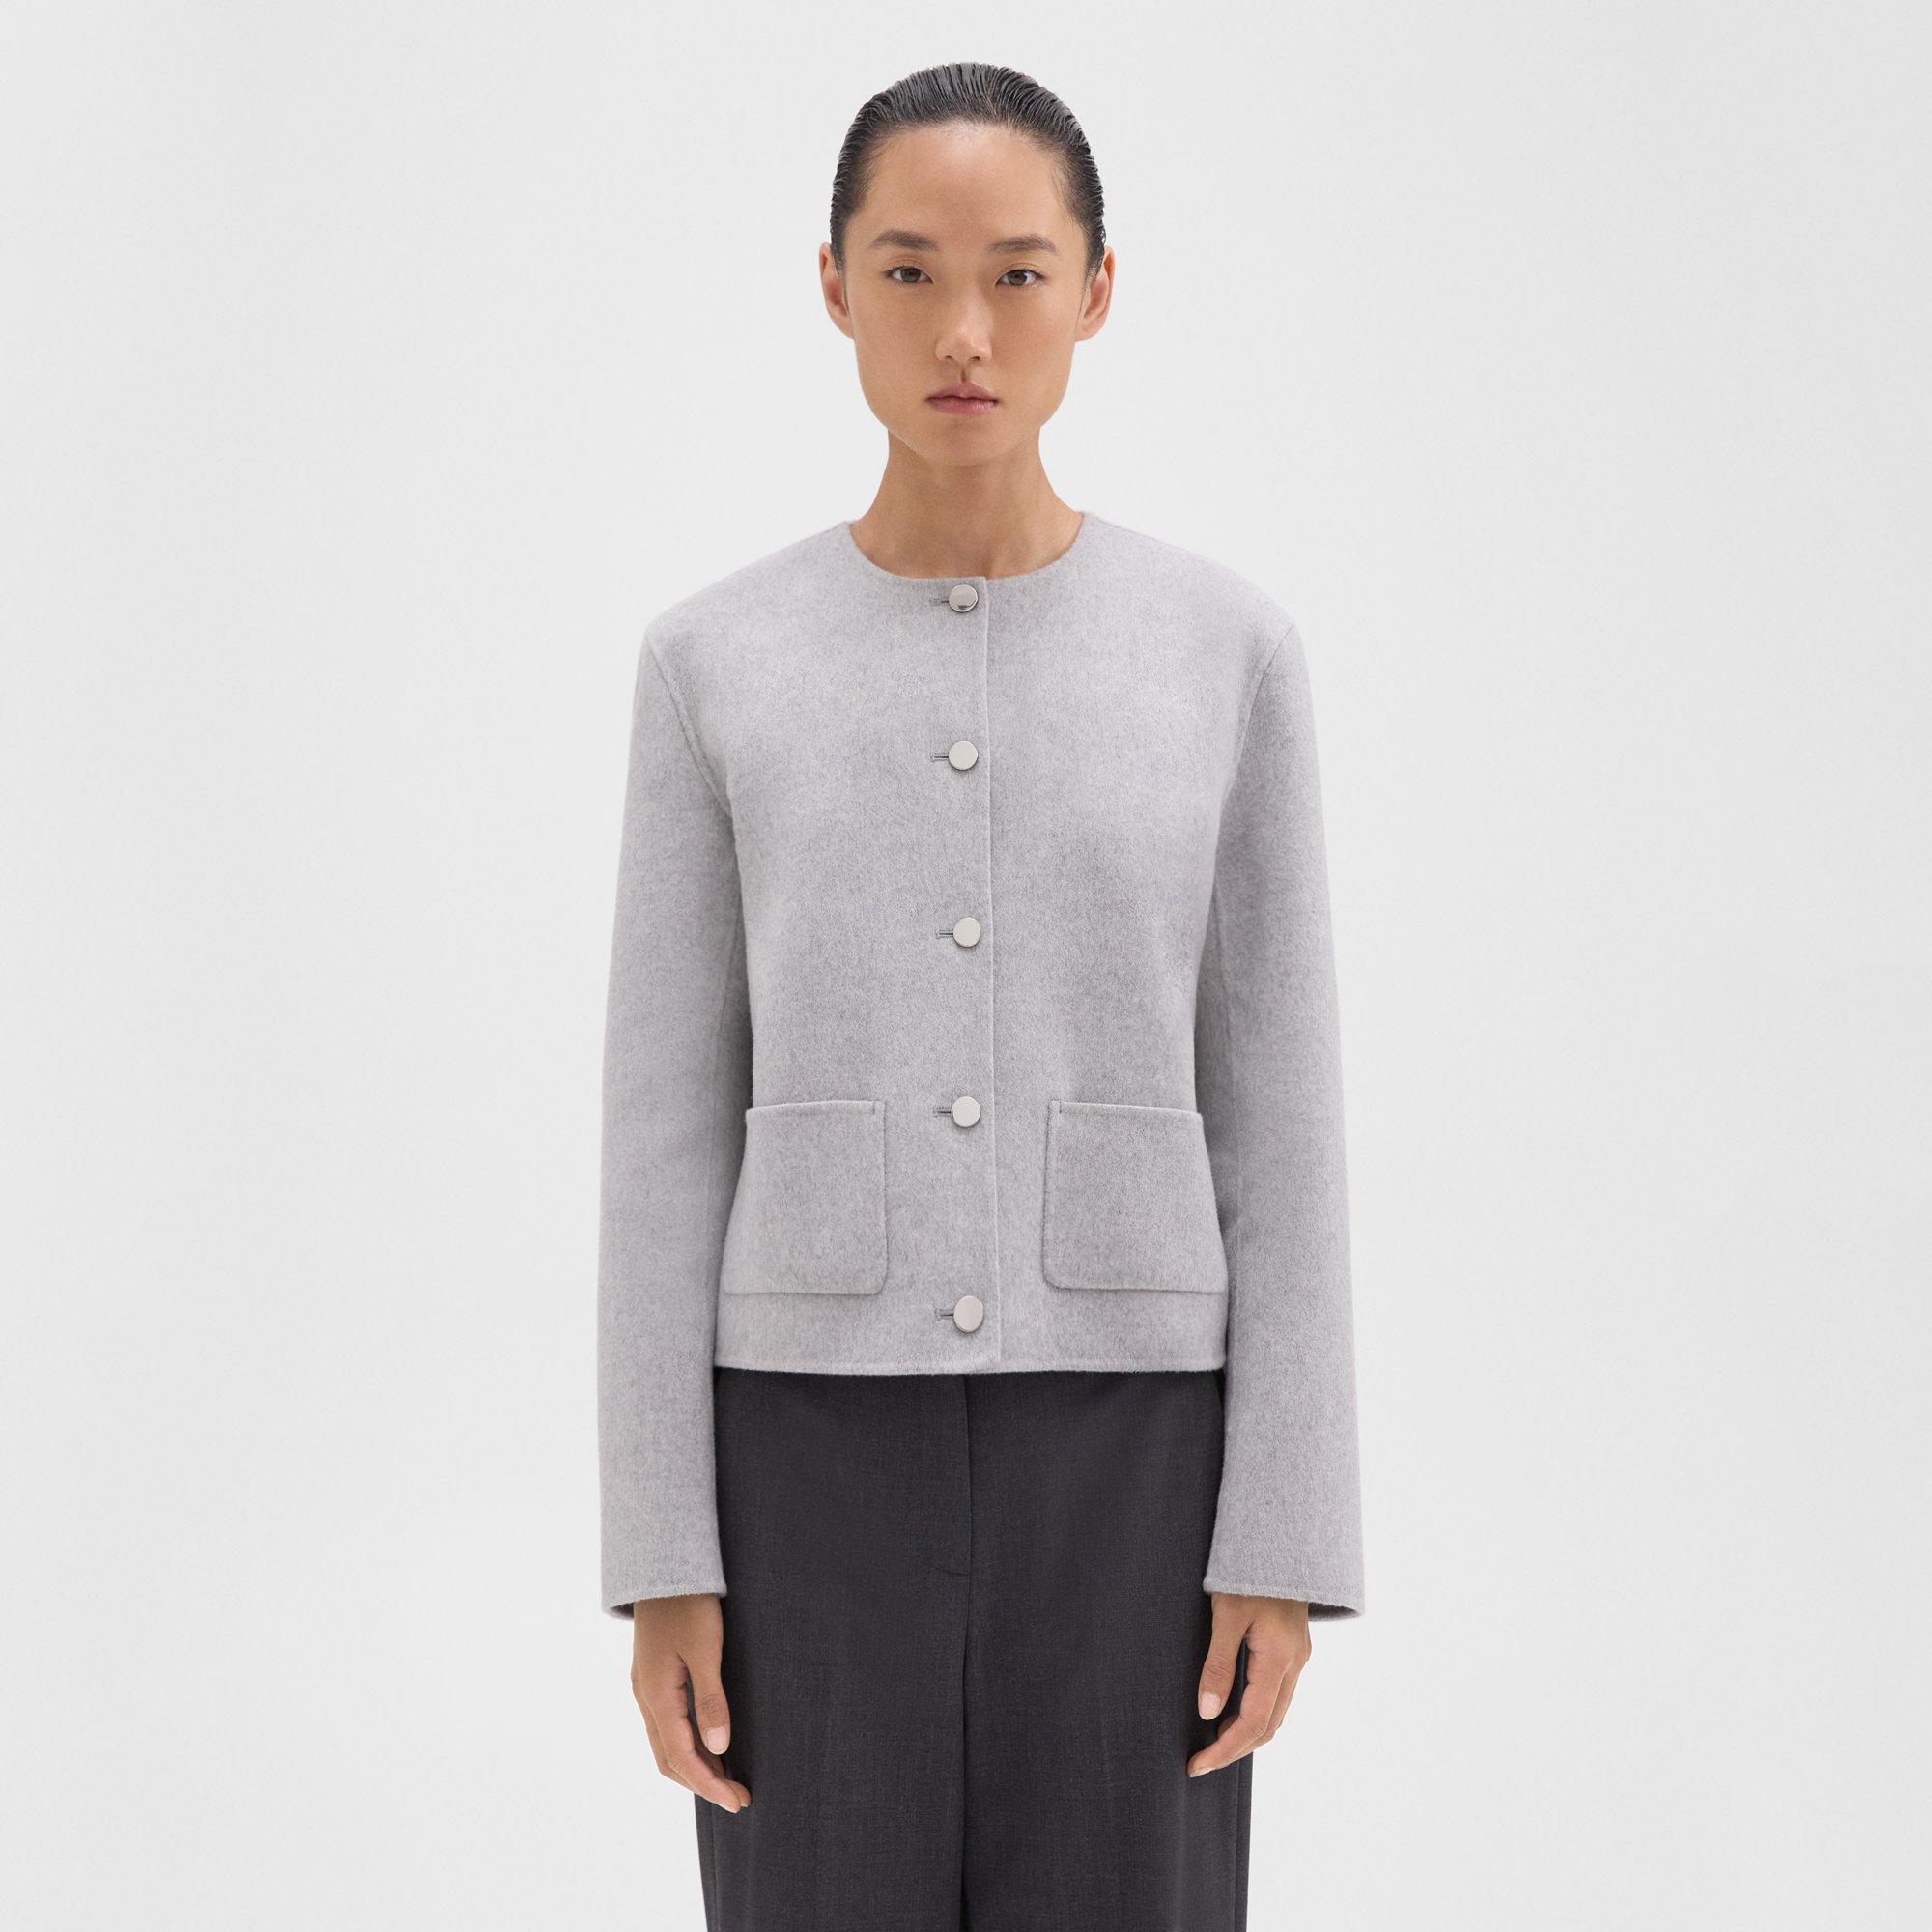 Theory Cropped Jacket in Double-Face Wool-Cashmere